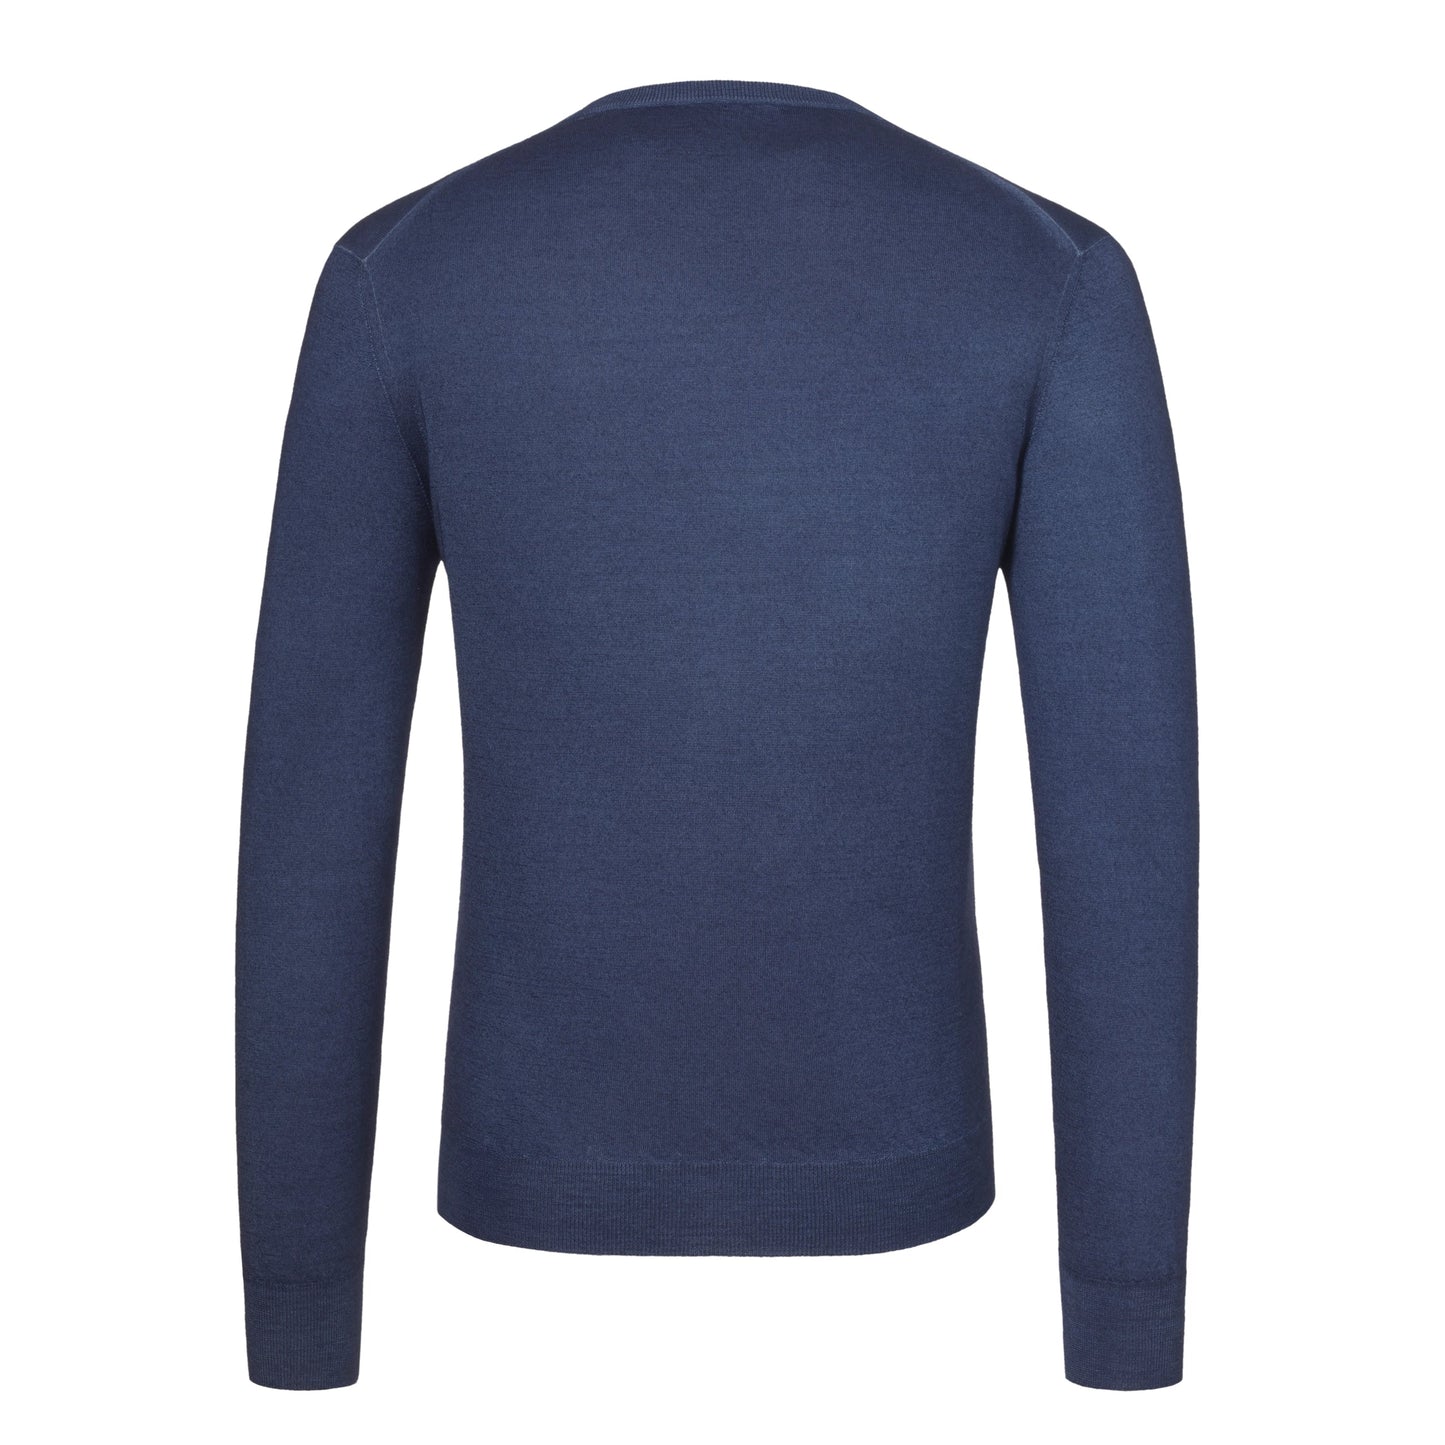 Cruciani Cashmere and Silk Crew - Neck Sweater in Royal Blue - SARTALE